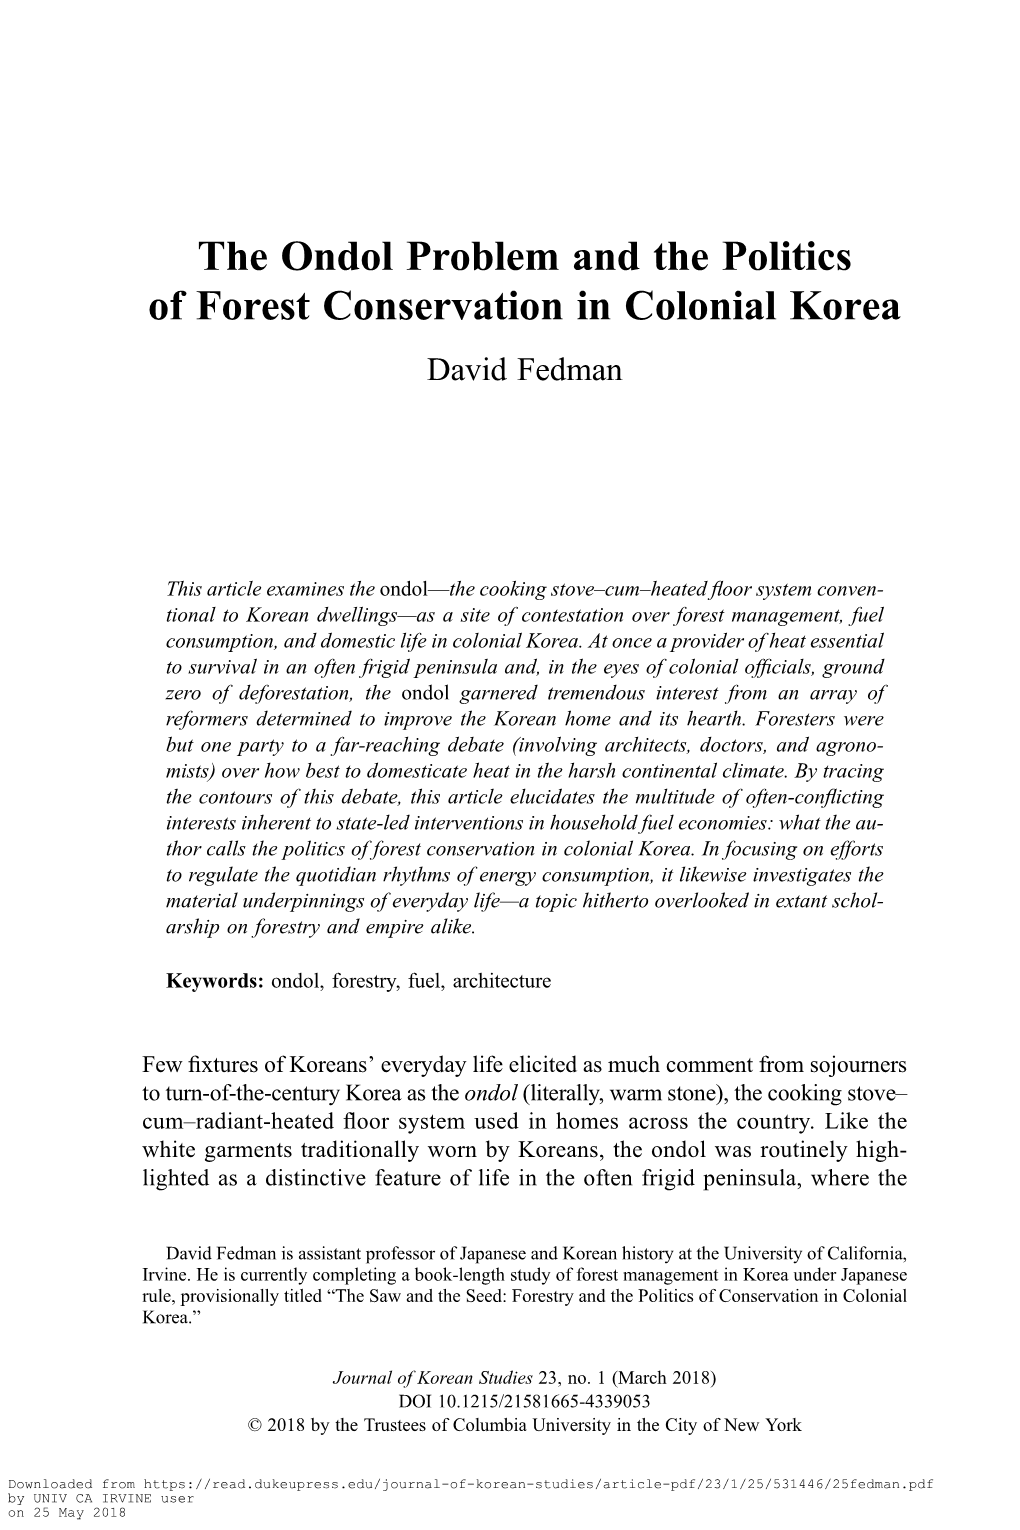 The Ondol Problem and the Politics of Forest Conservation in Colonial Korea David Fedman